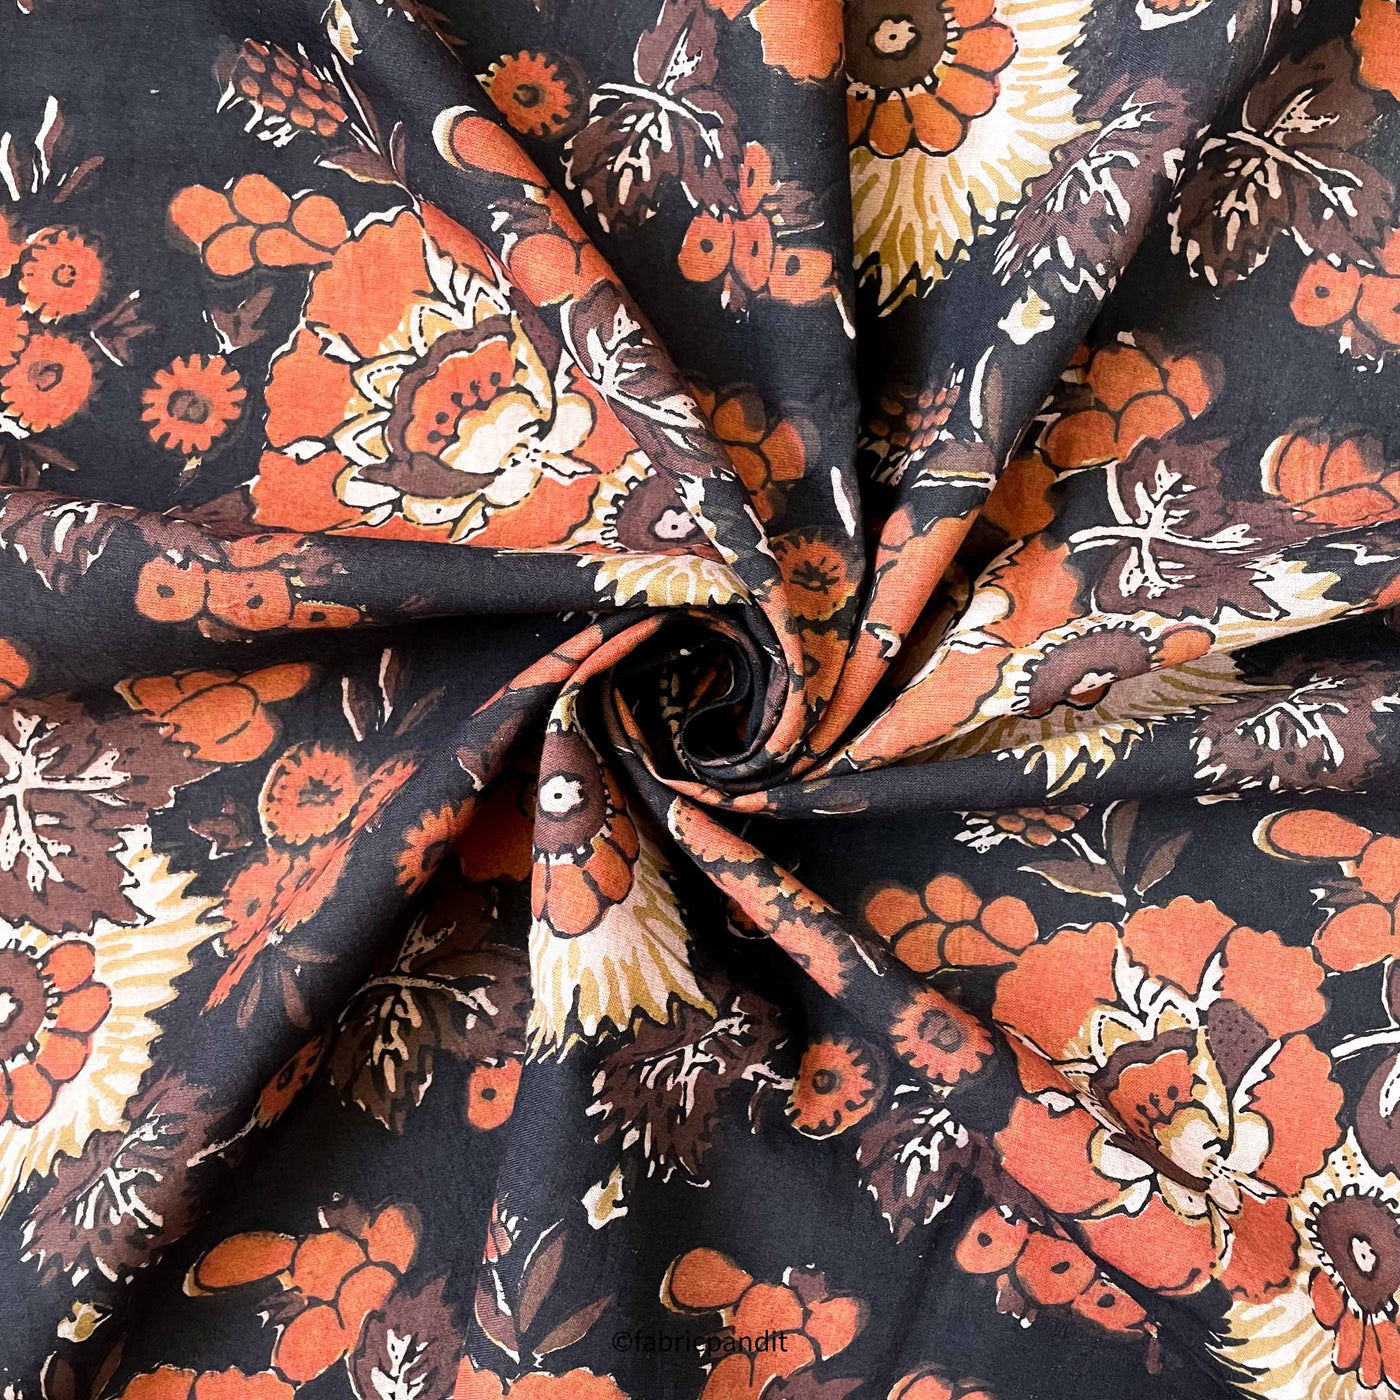 Fabric Pandit Fabric Dusty Black and Orange Wild Flowers Pure Ajrakh Natural Dyed Hand Block Printed Pure Cotton Fabric (Width 42 inches)